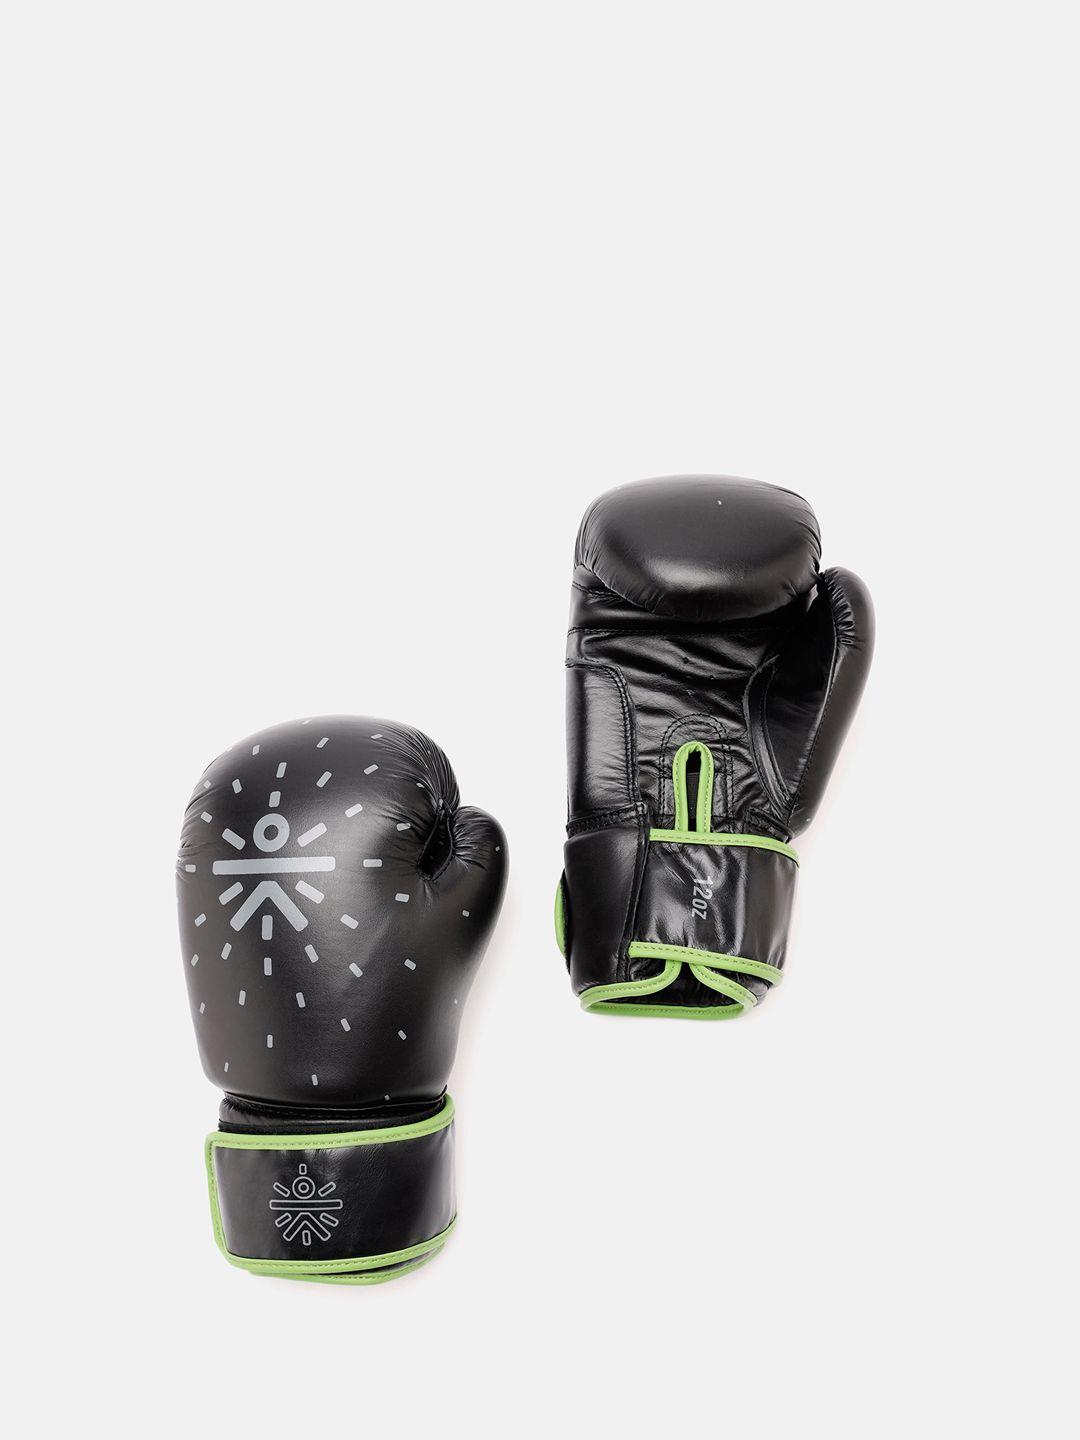 cultsport brand logo printed leather antimicrobial boxing gloves